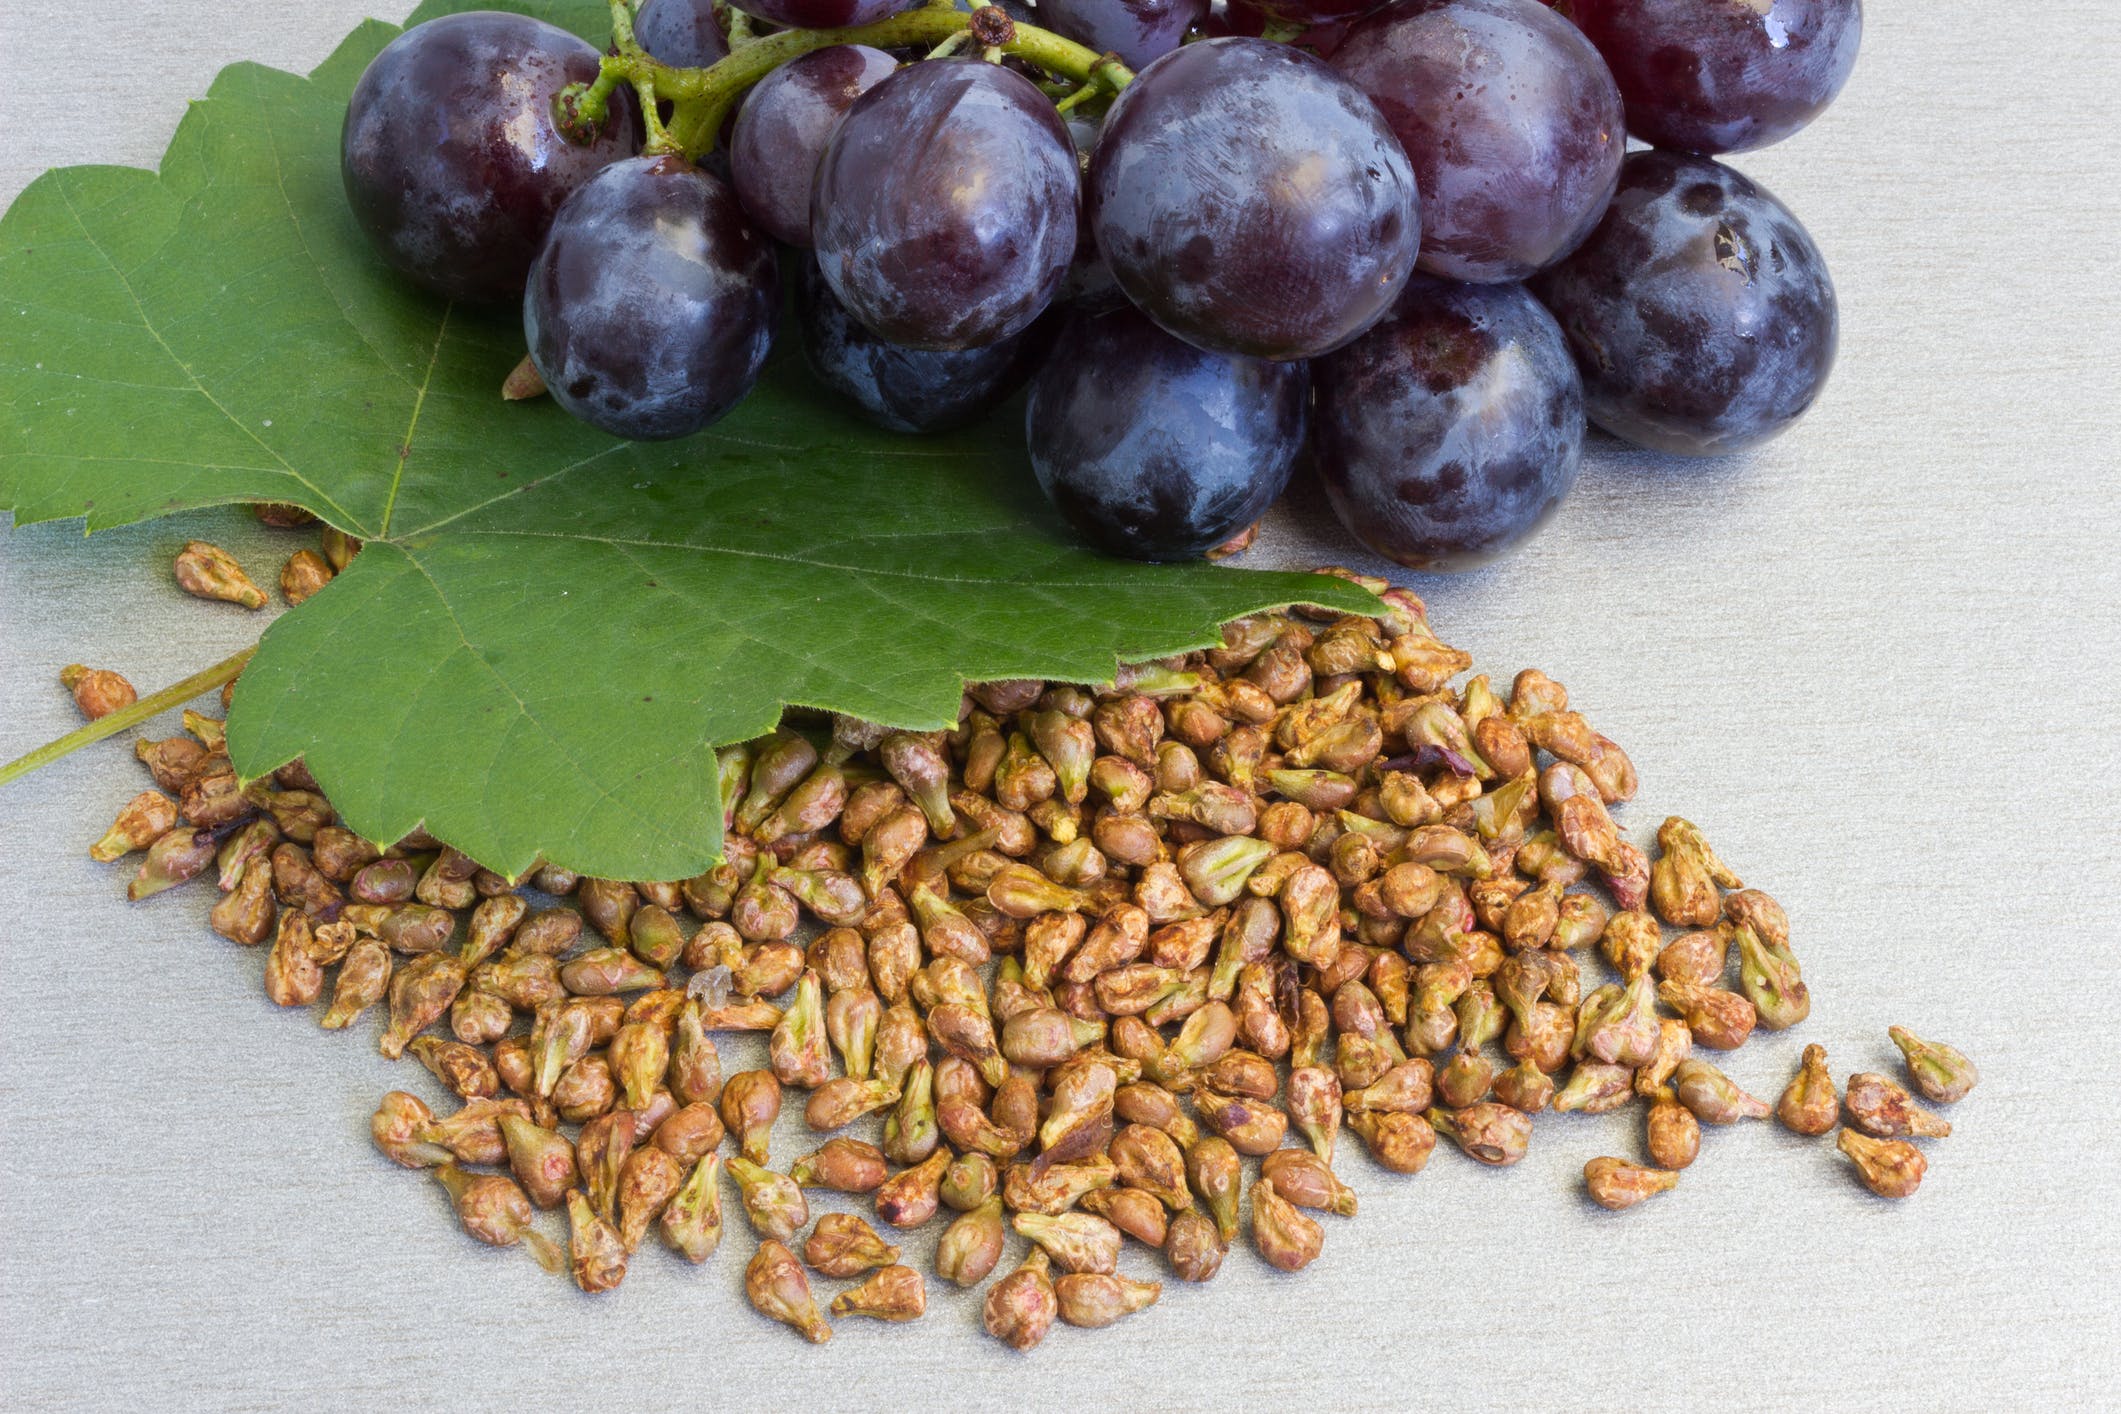 Can Grape Seeds Relieve Pain?